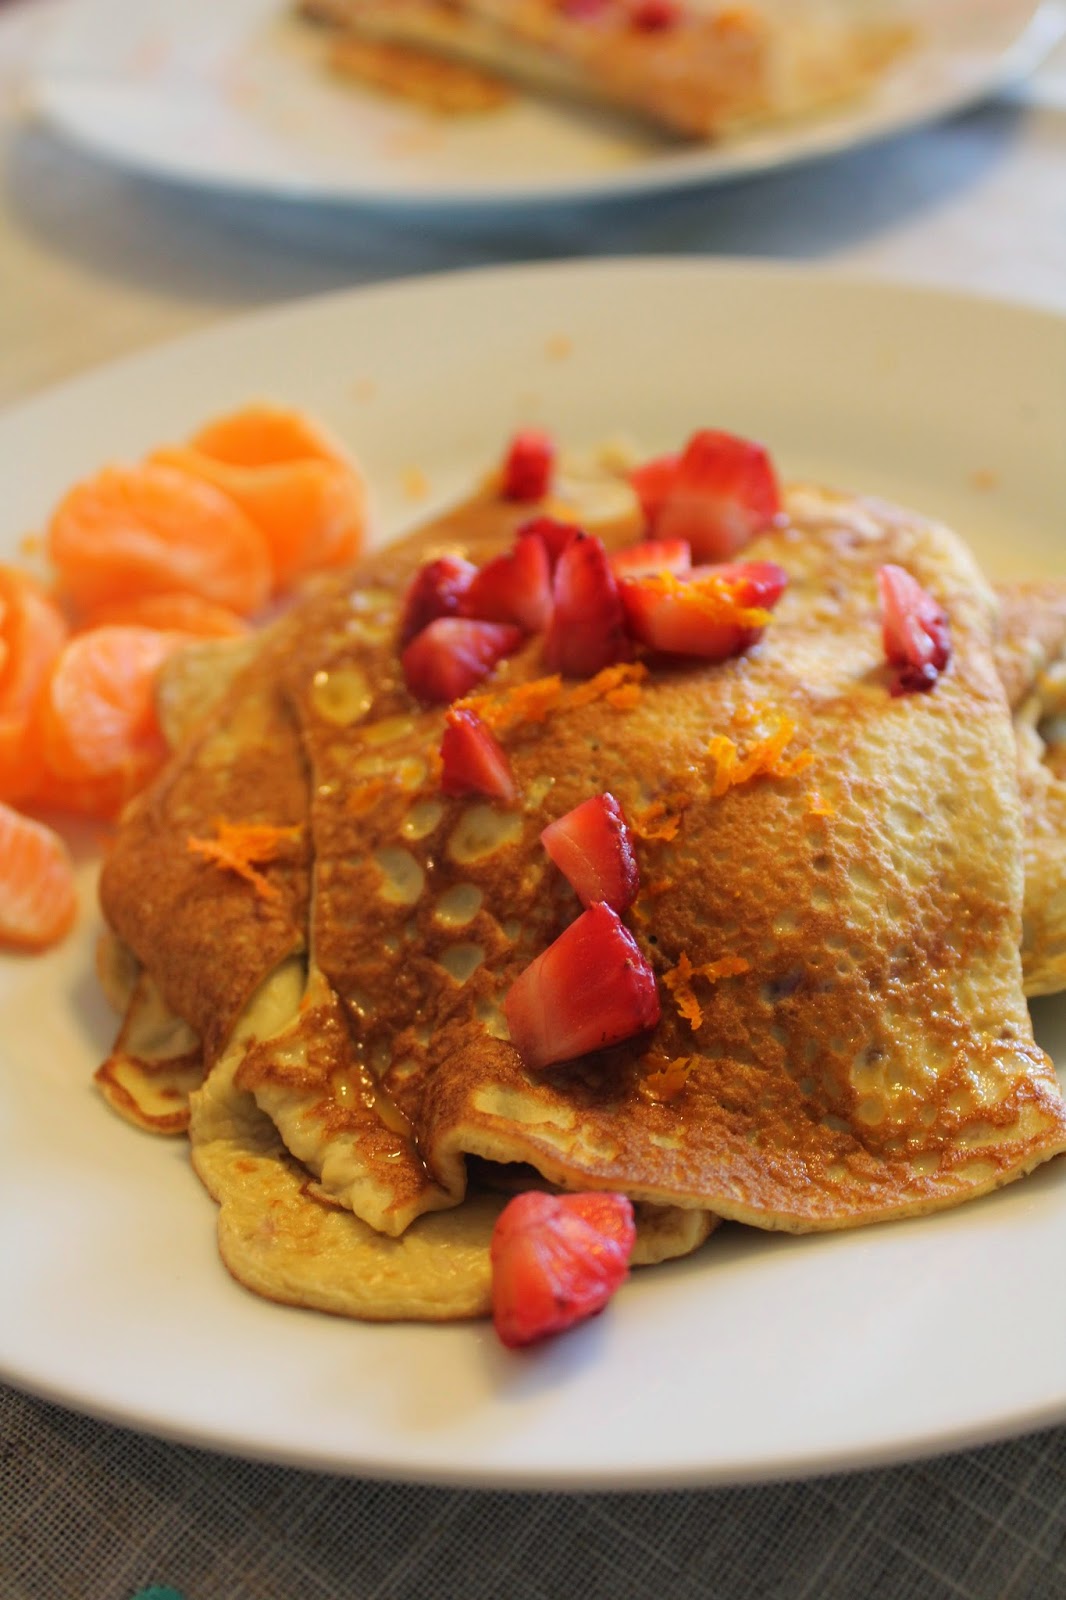 Schoolhouse Ronk: Whole30 Strawberry Clementine Omelet